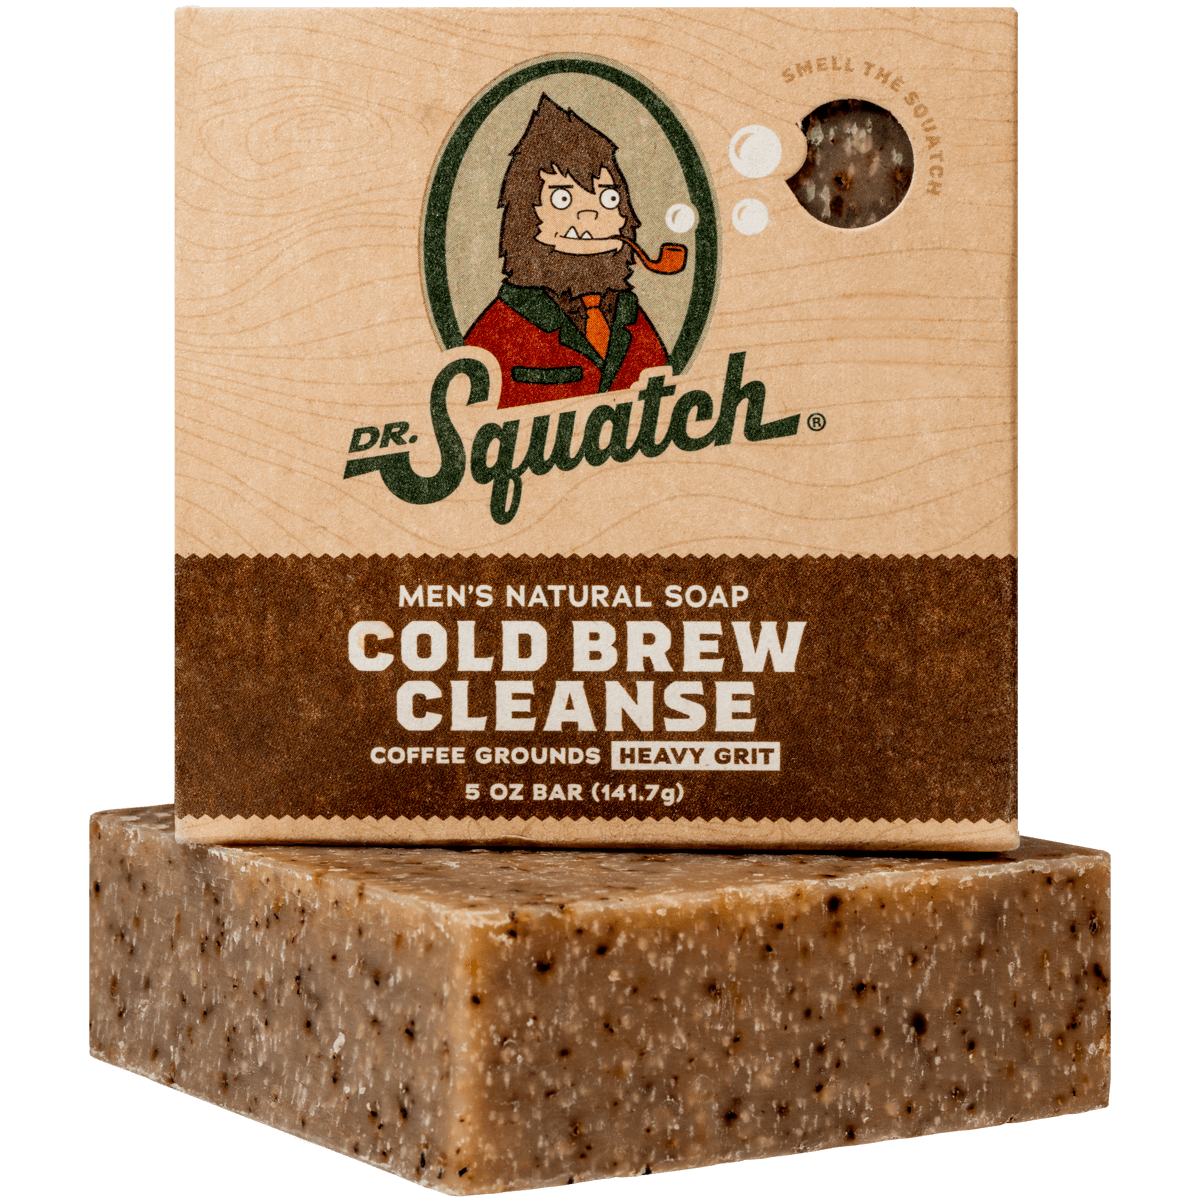  Dr. Squatch Men's Natural Bar Soap from Cold Process